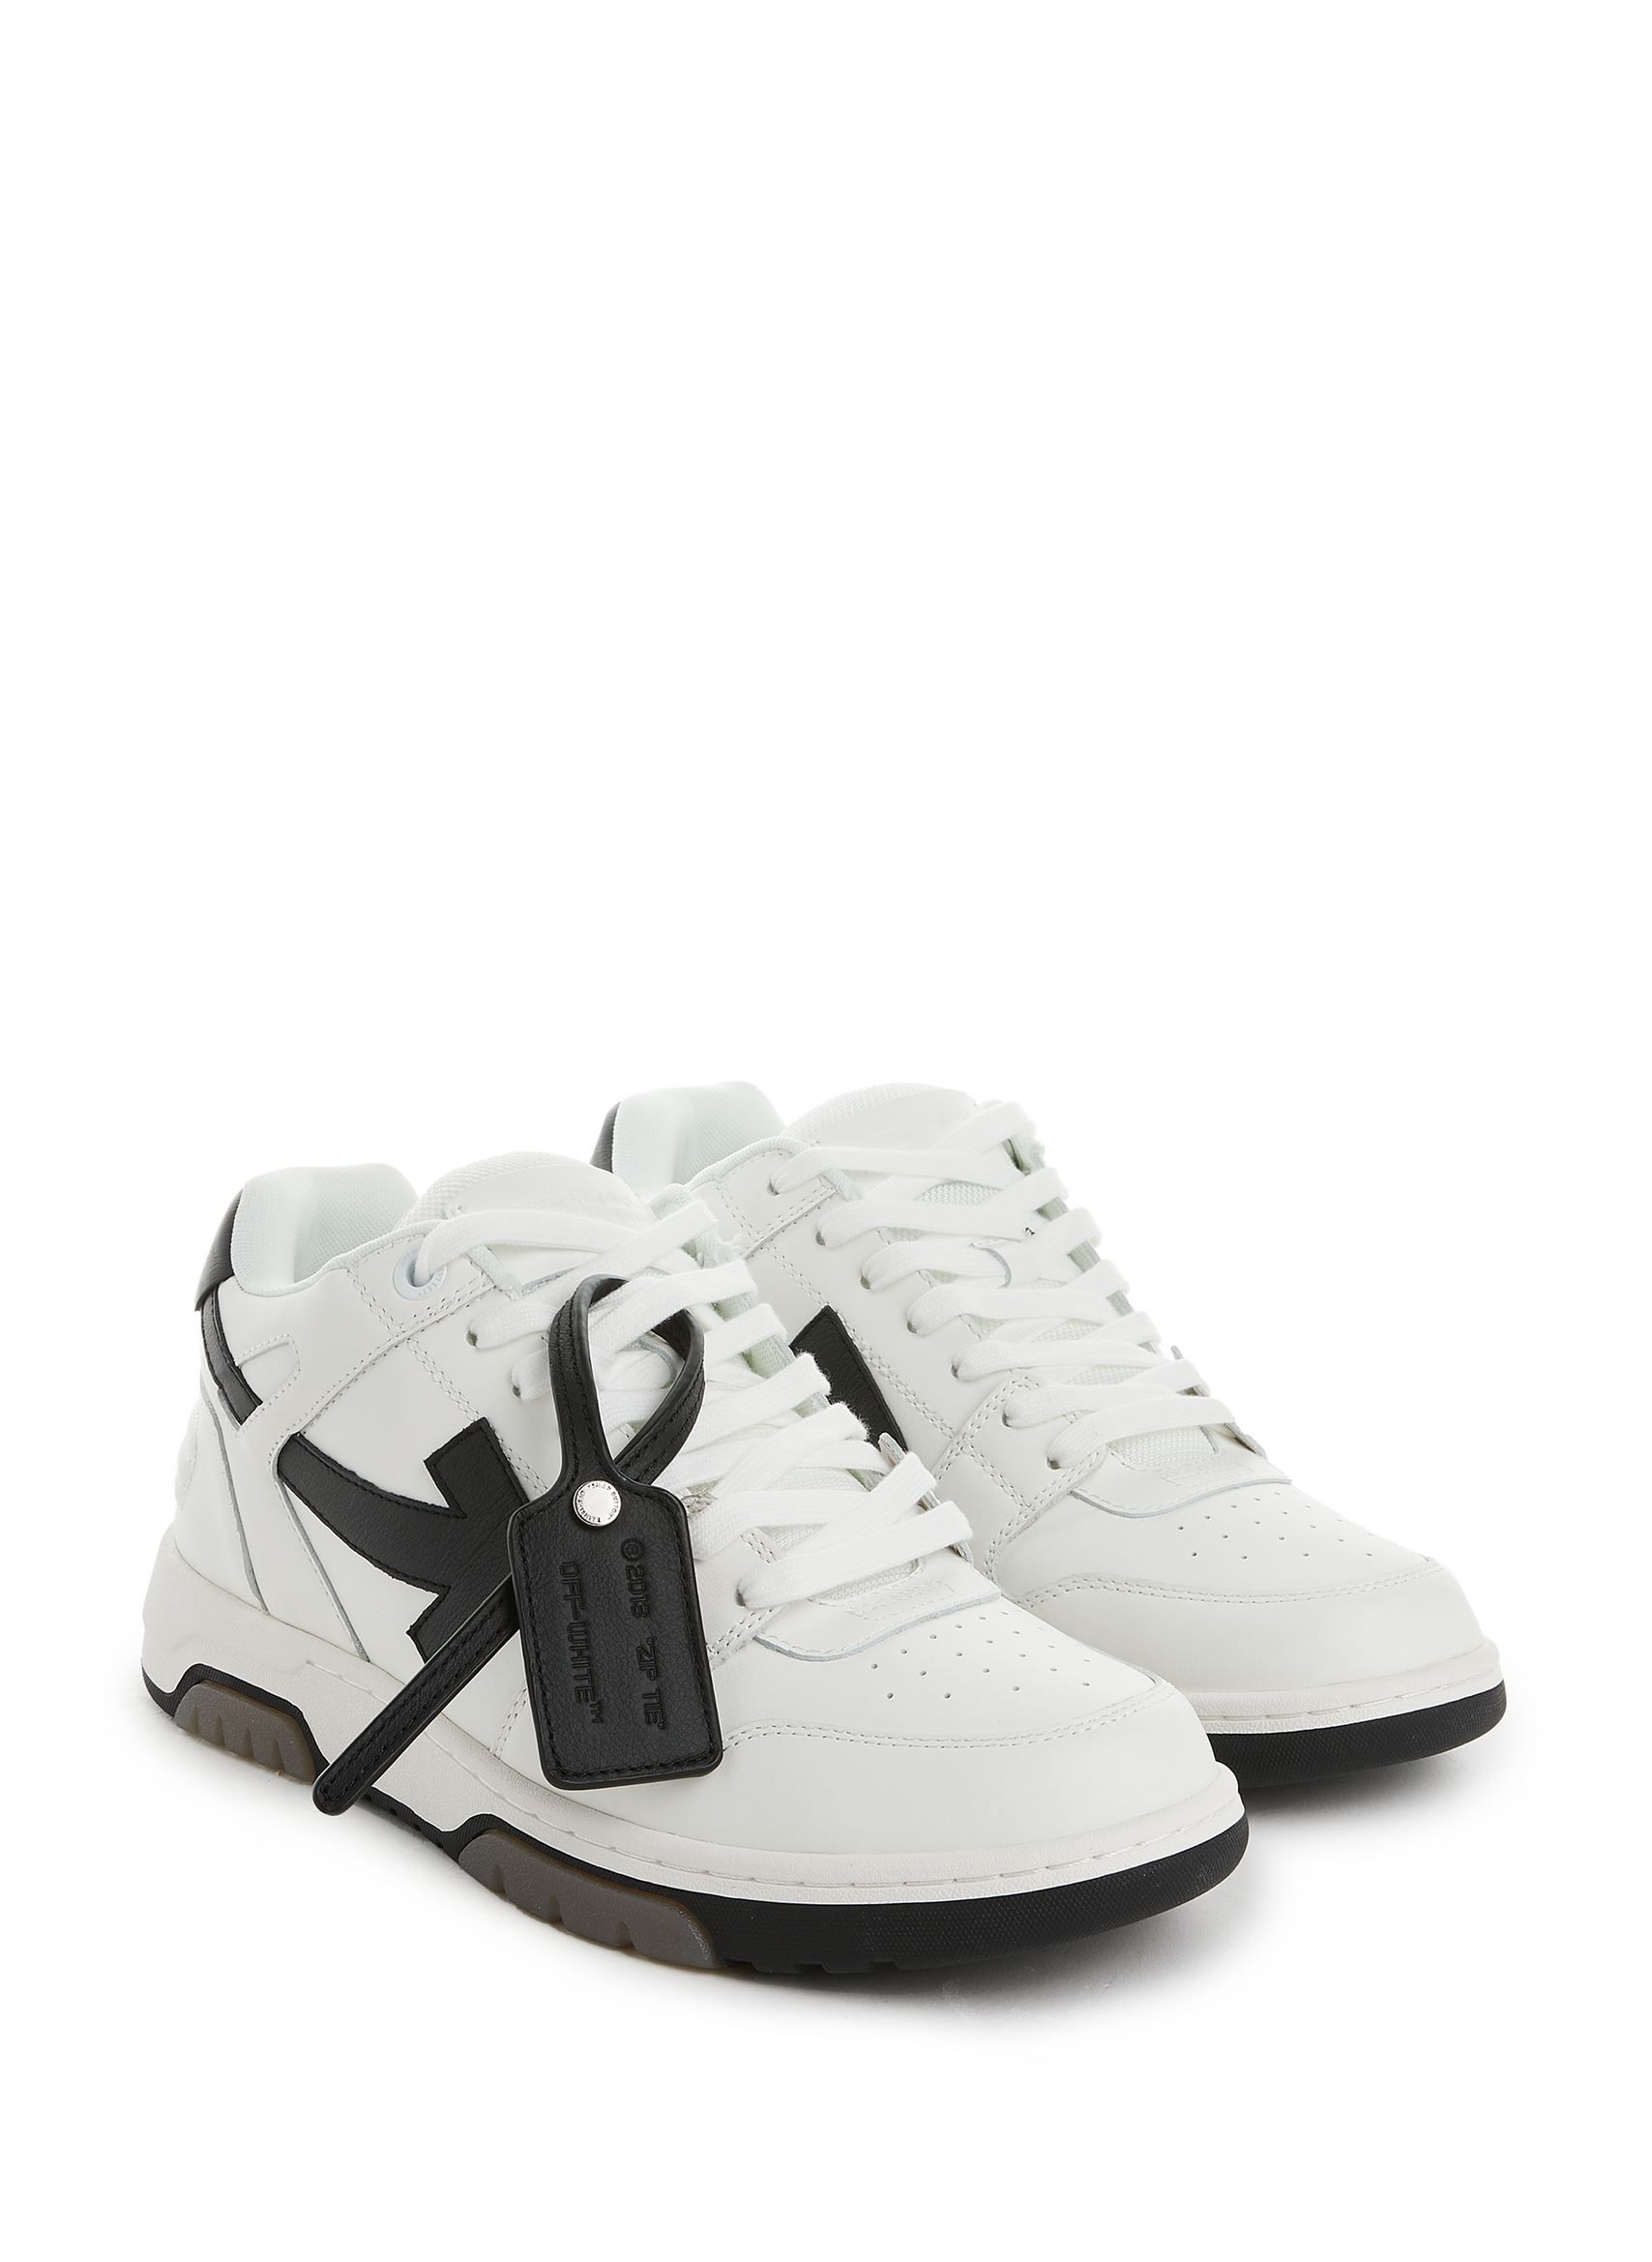 OUT OF OFFICE LEATHER SNEAKERS - OFF WHITE for MEN | Printemps.com